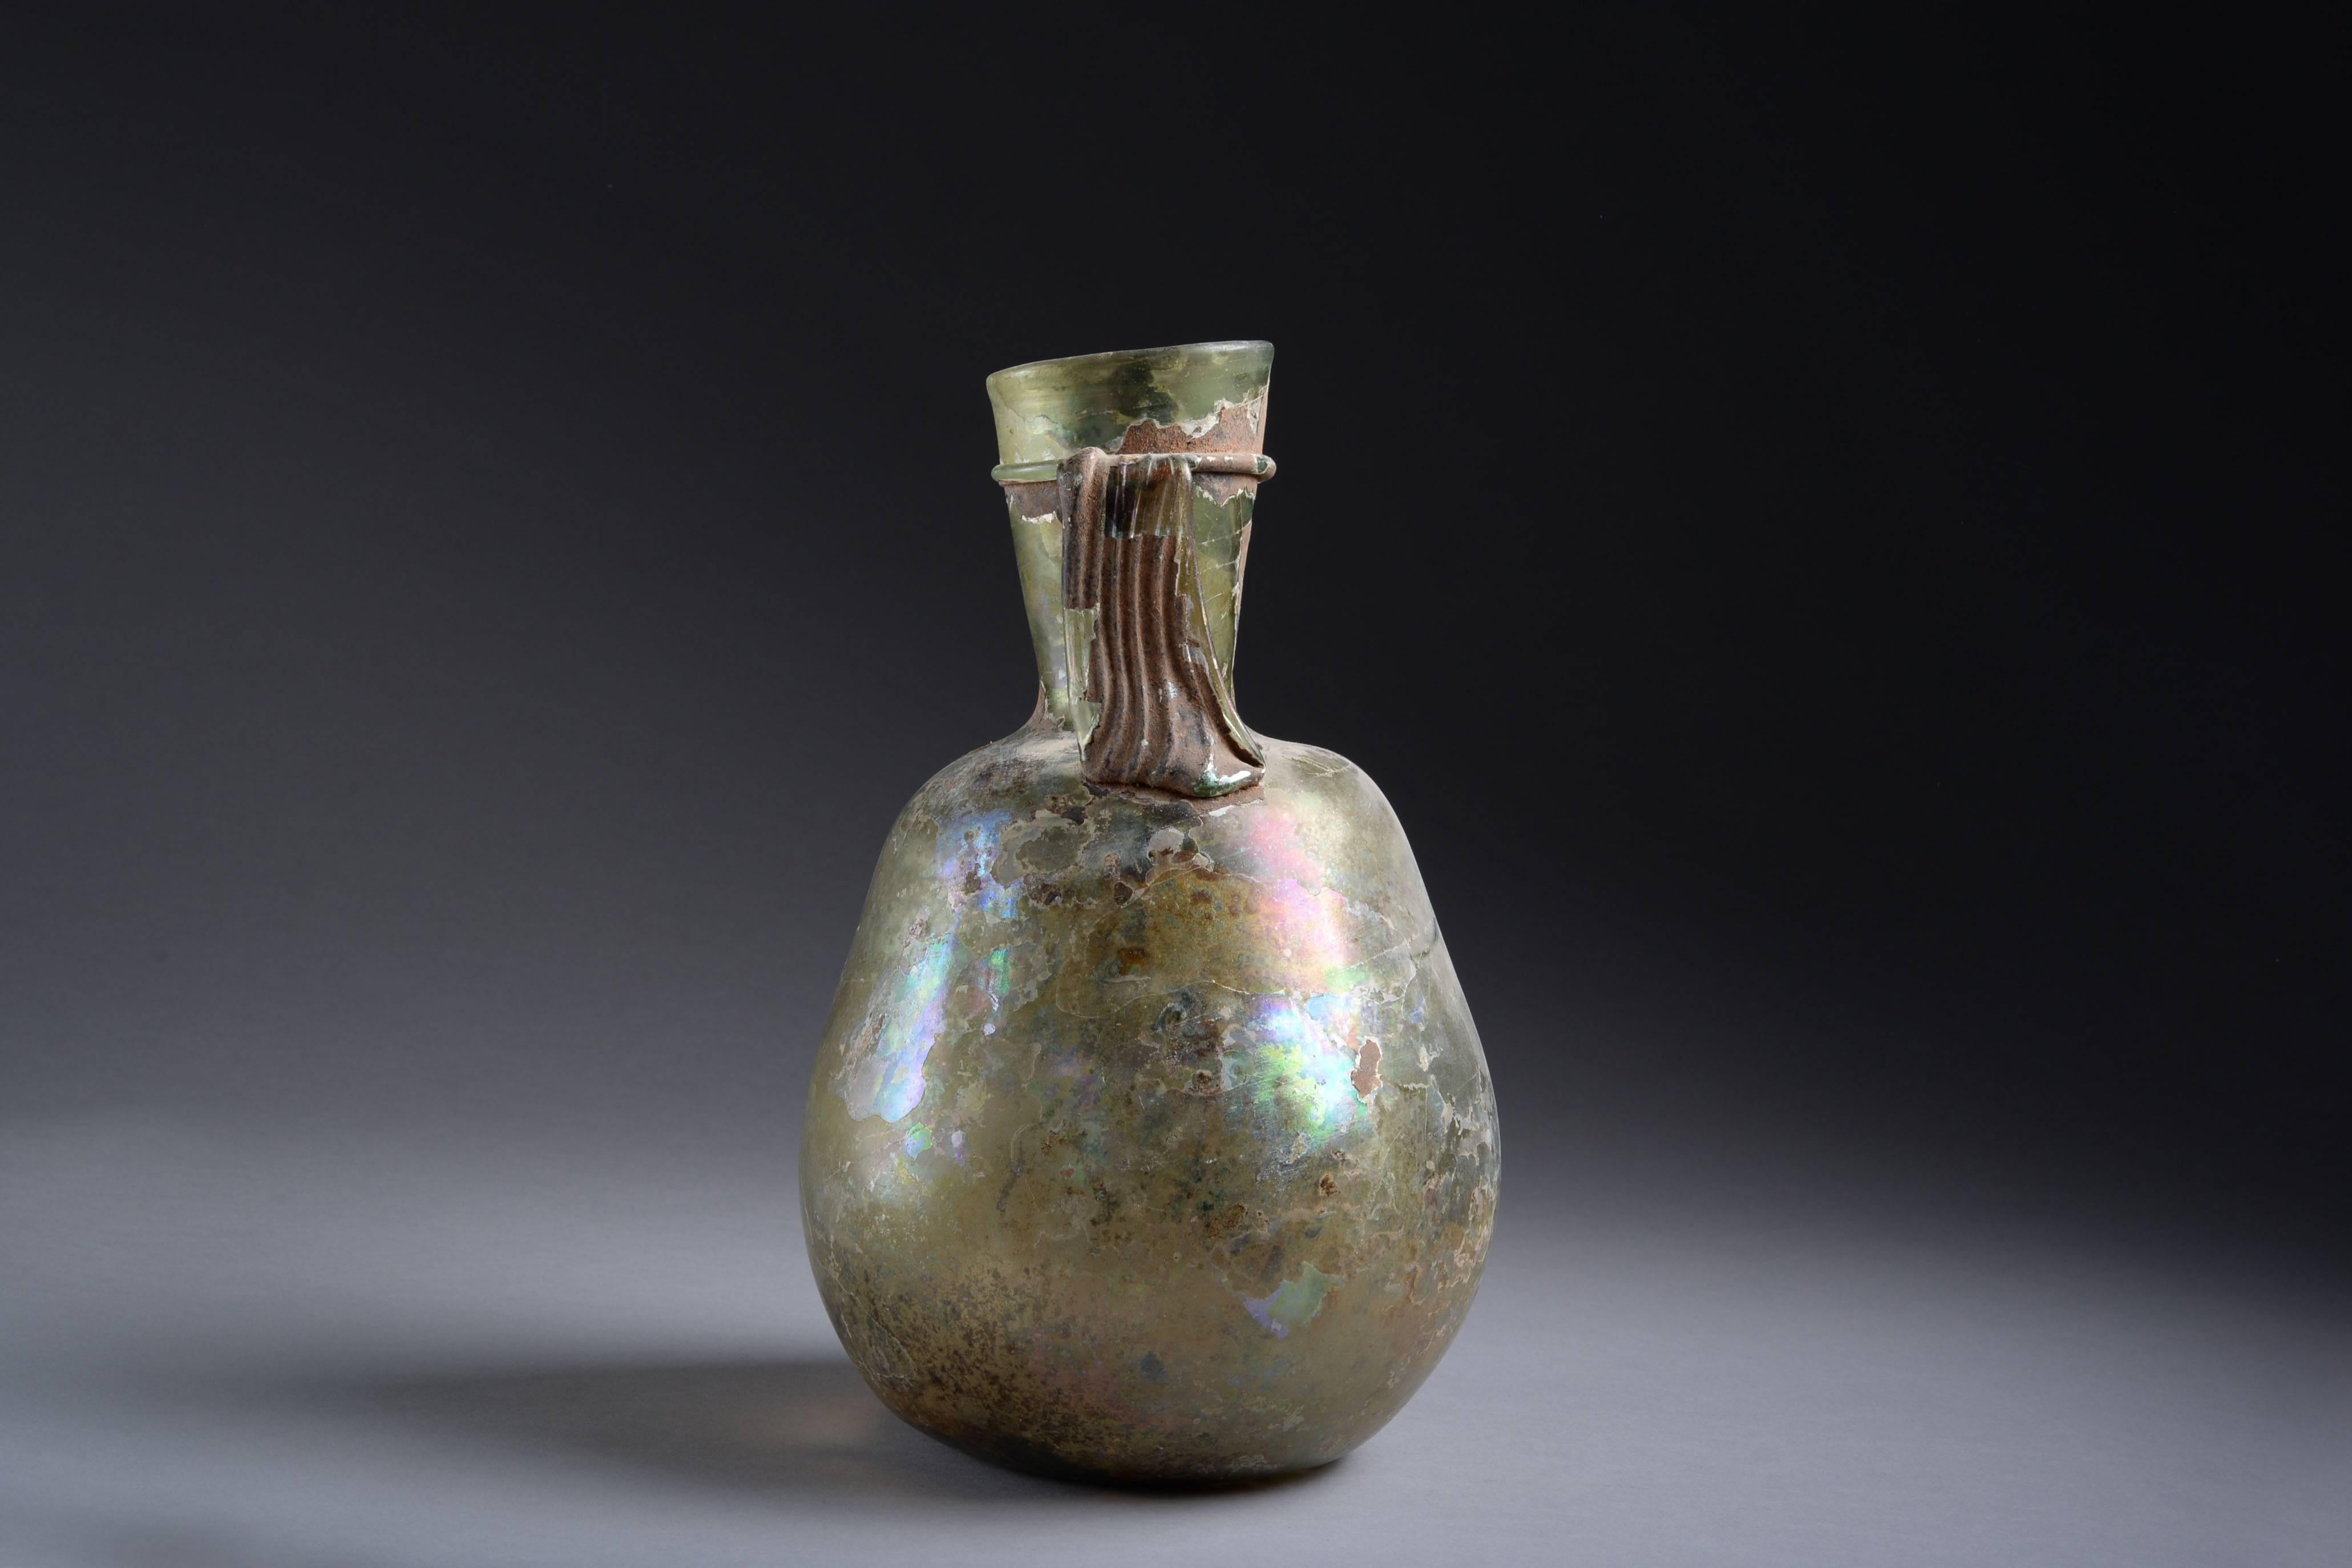 18th Century and Earlier Large Ancient Roman Green Glass Vessel, 250 AD